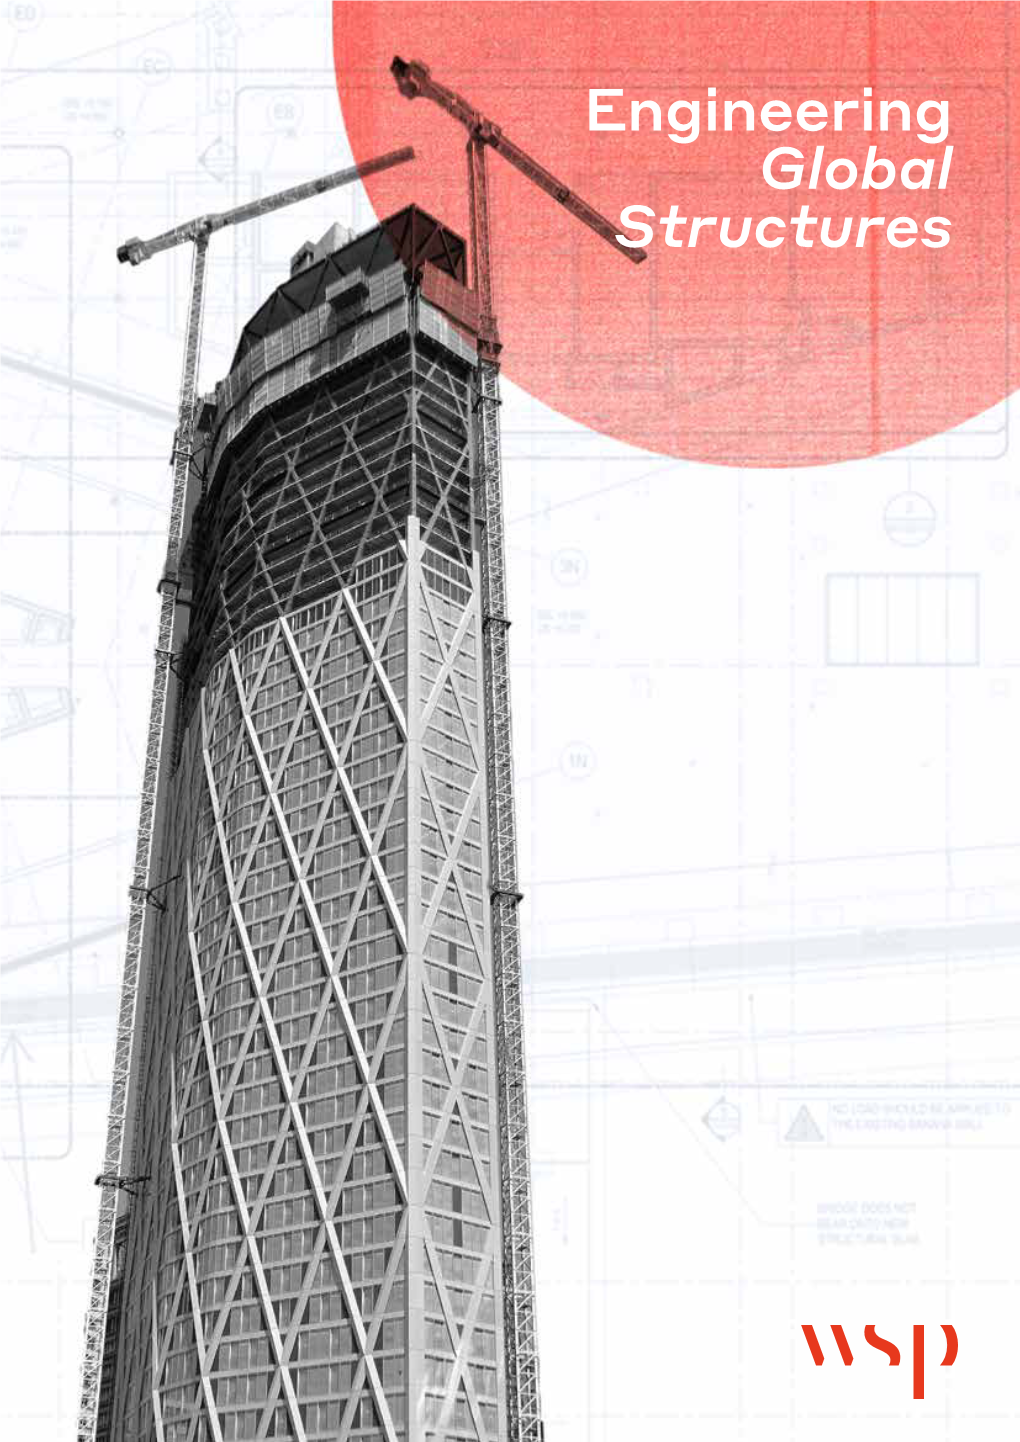 Engineering Global Structures